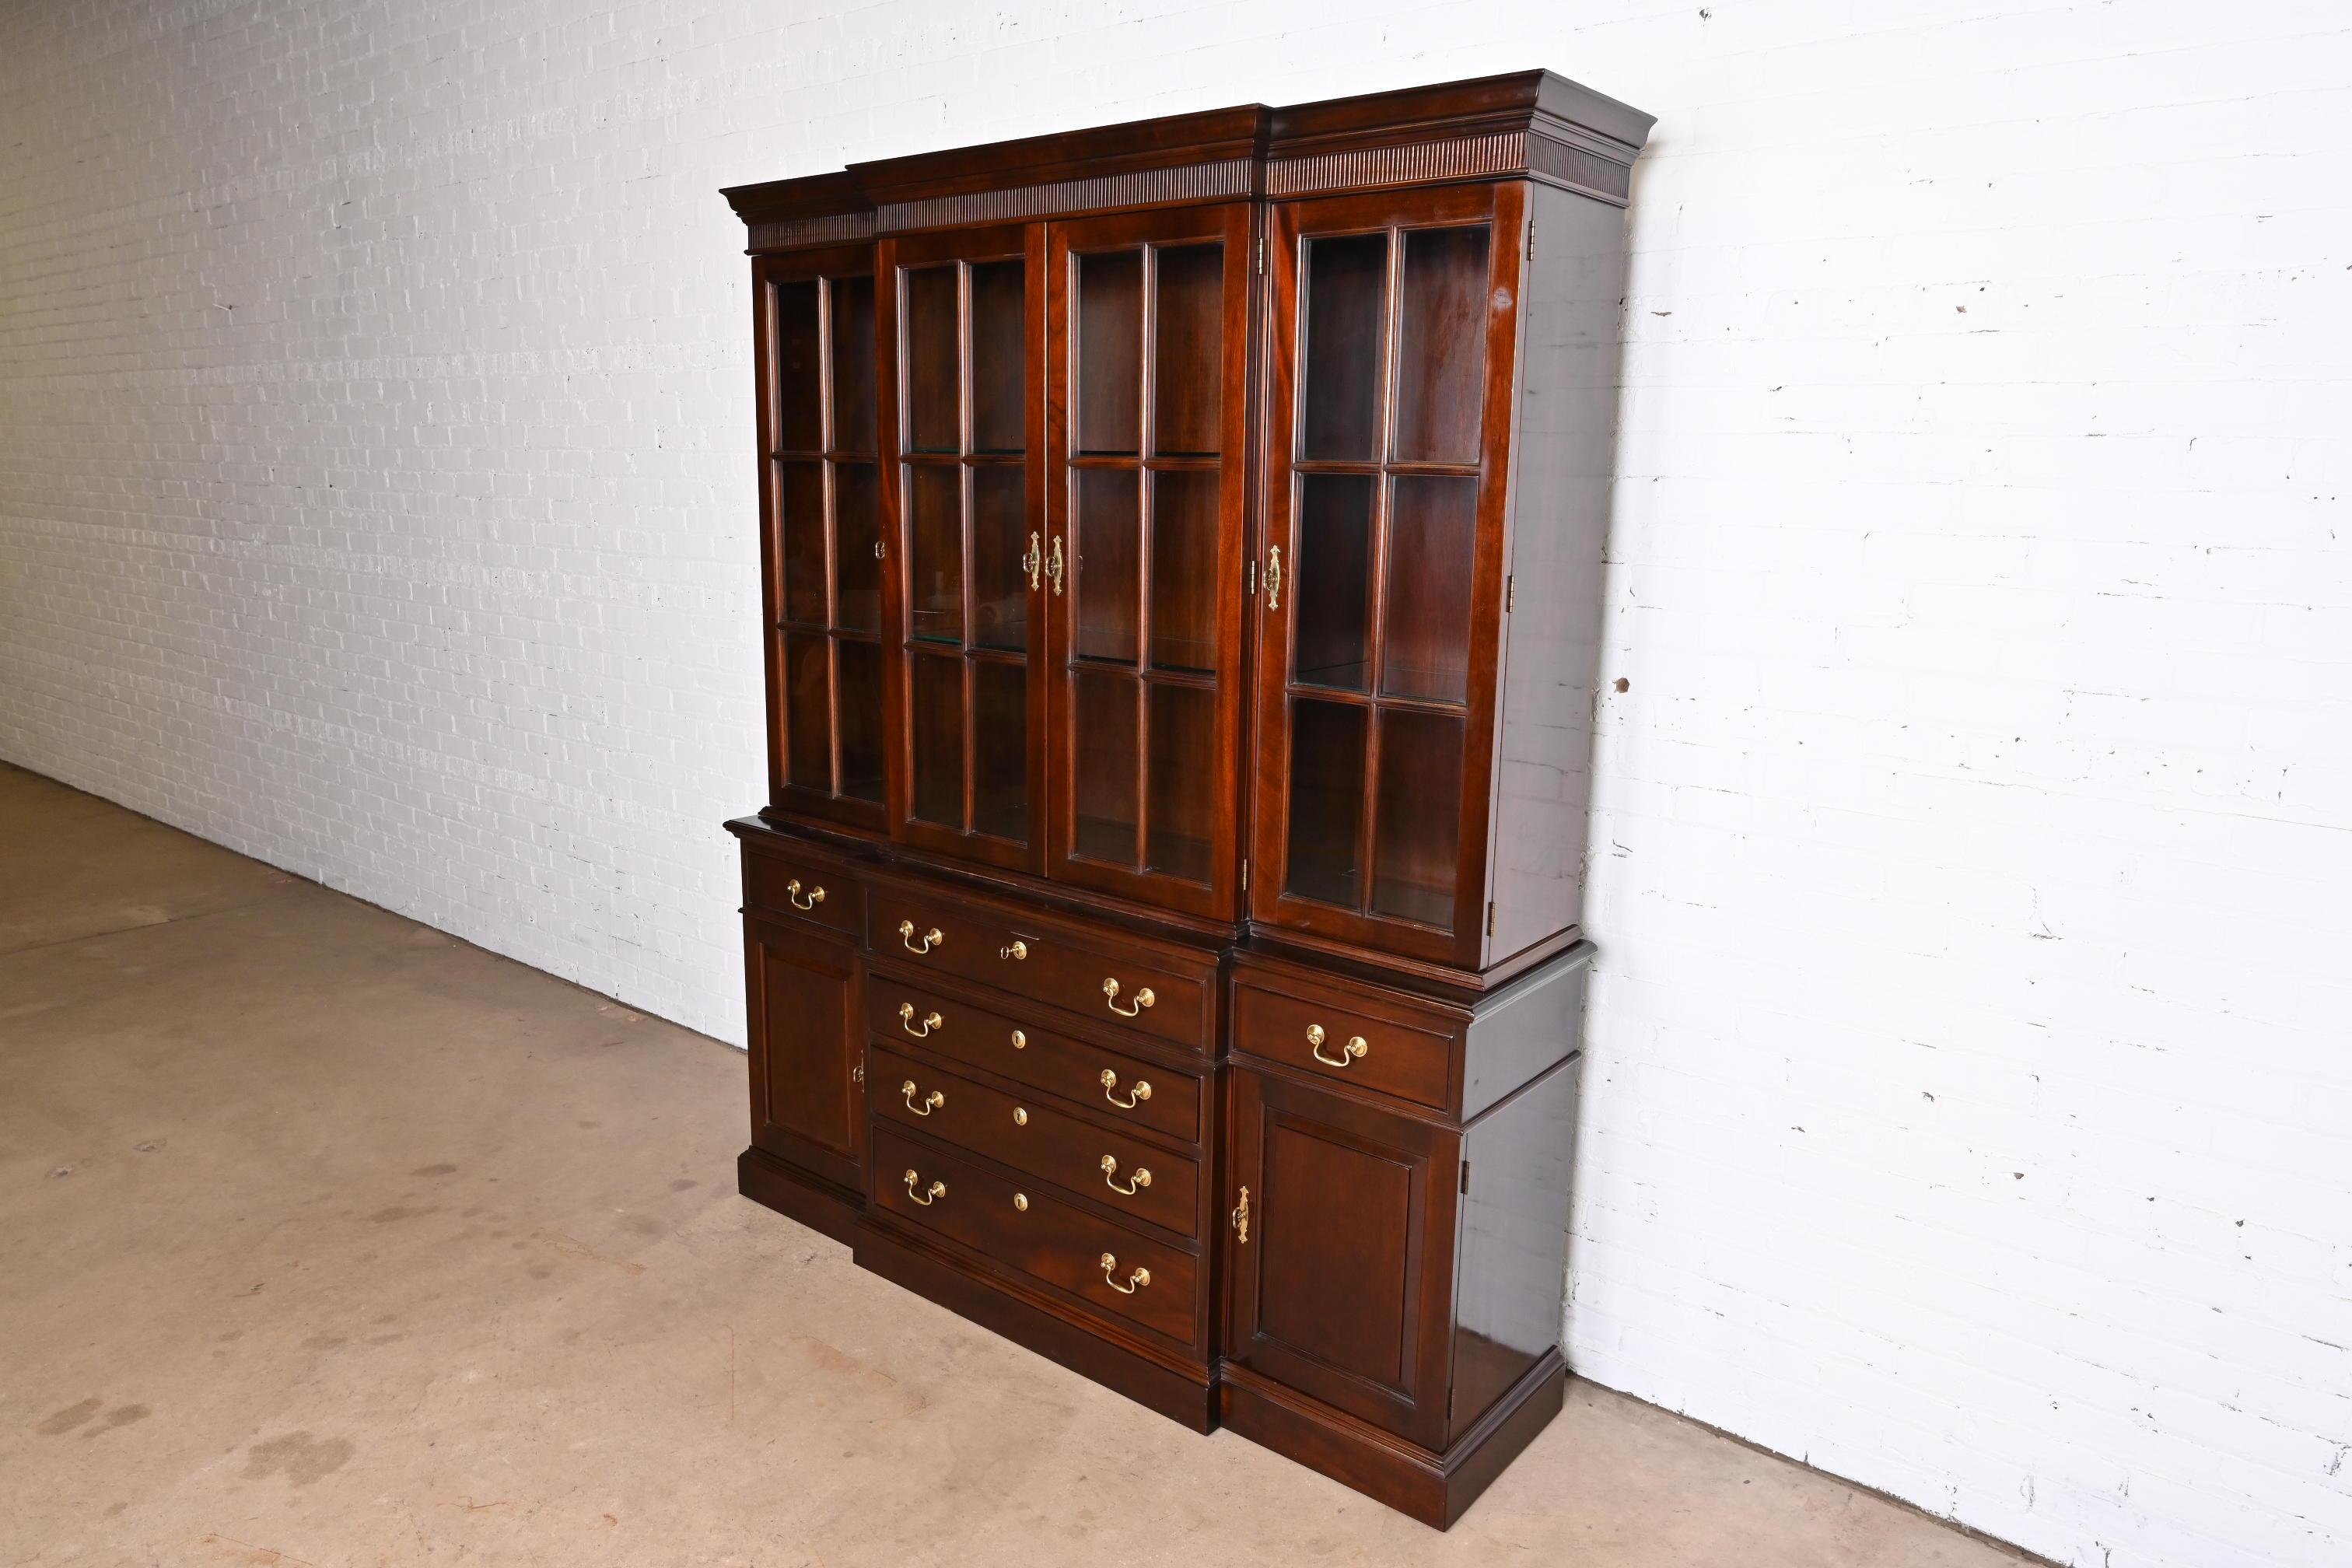 A beautiful Georgian style lighted breakfront bookcase cabinet or china cabinet

By L. & J.G. Stickley

USA, Circa 1980s

Carved cherry wood, with glass front doors, and original brass hardware. Cabinet locks, and original key is